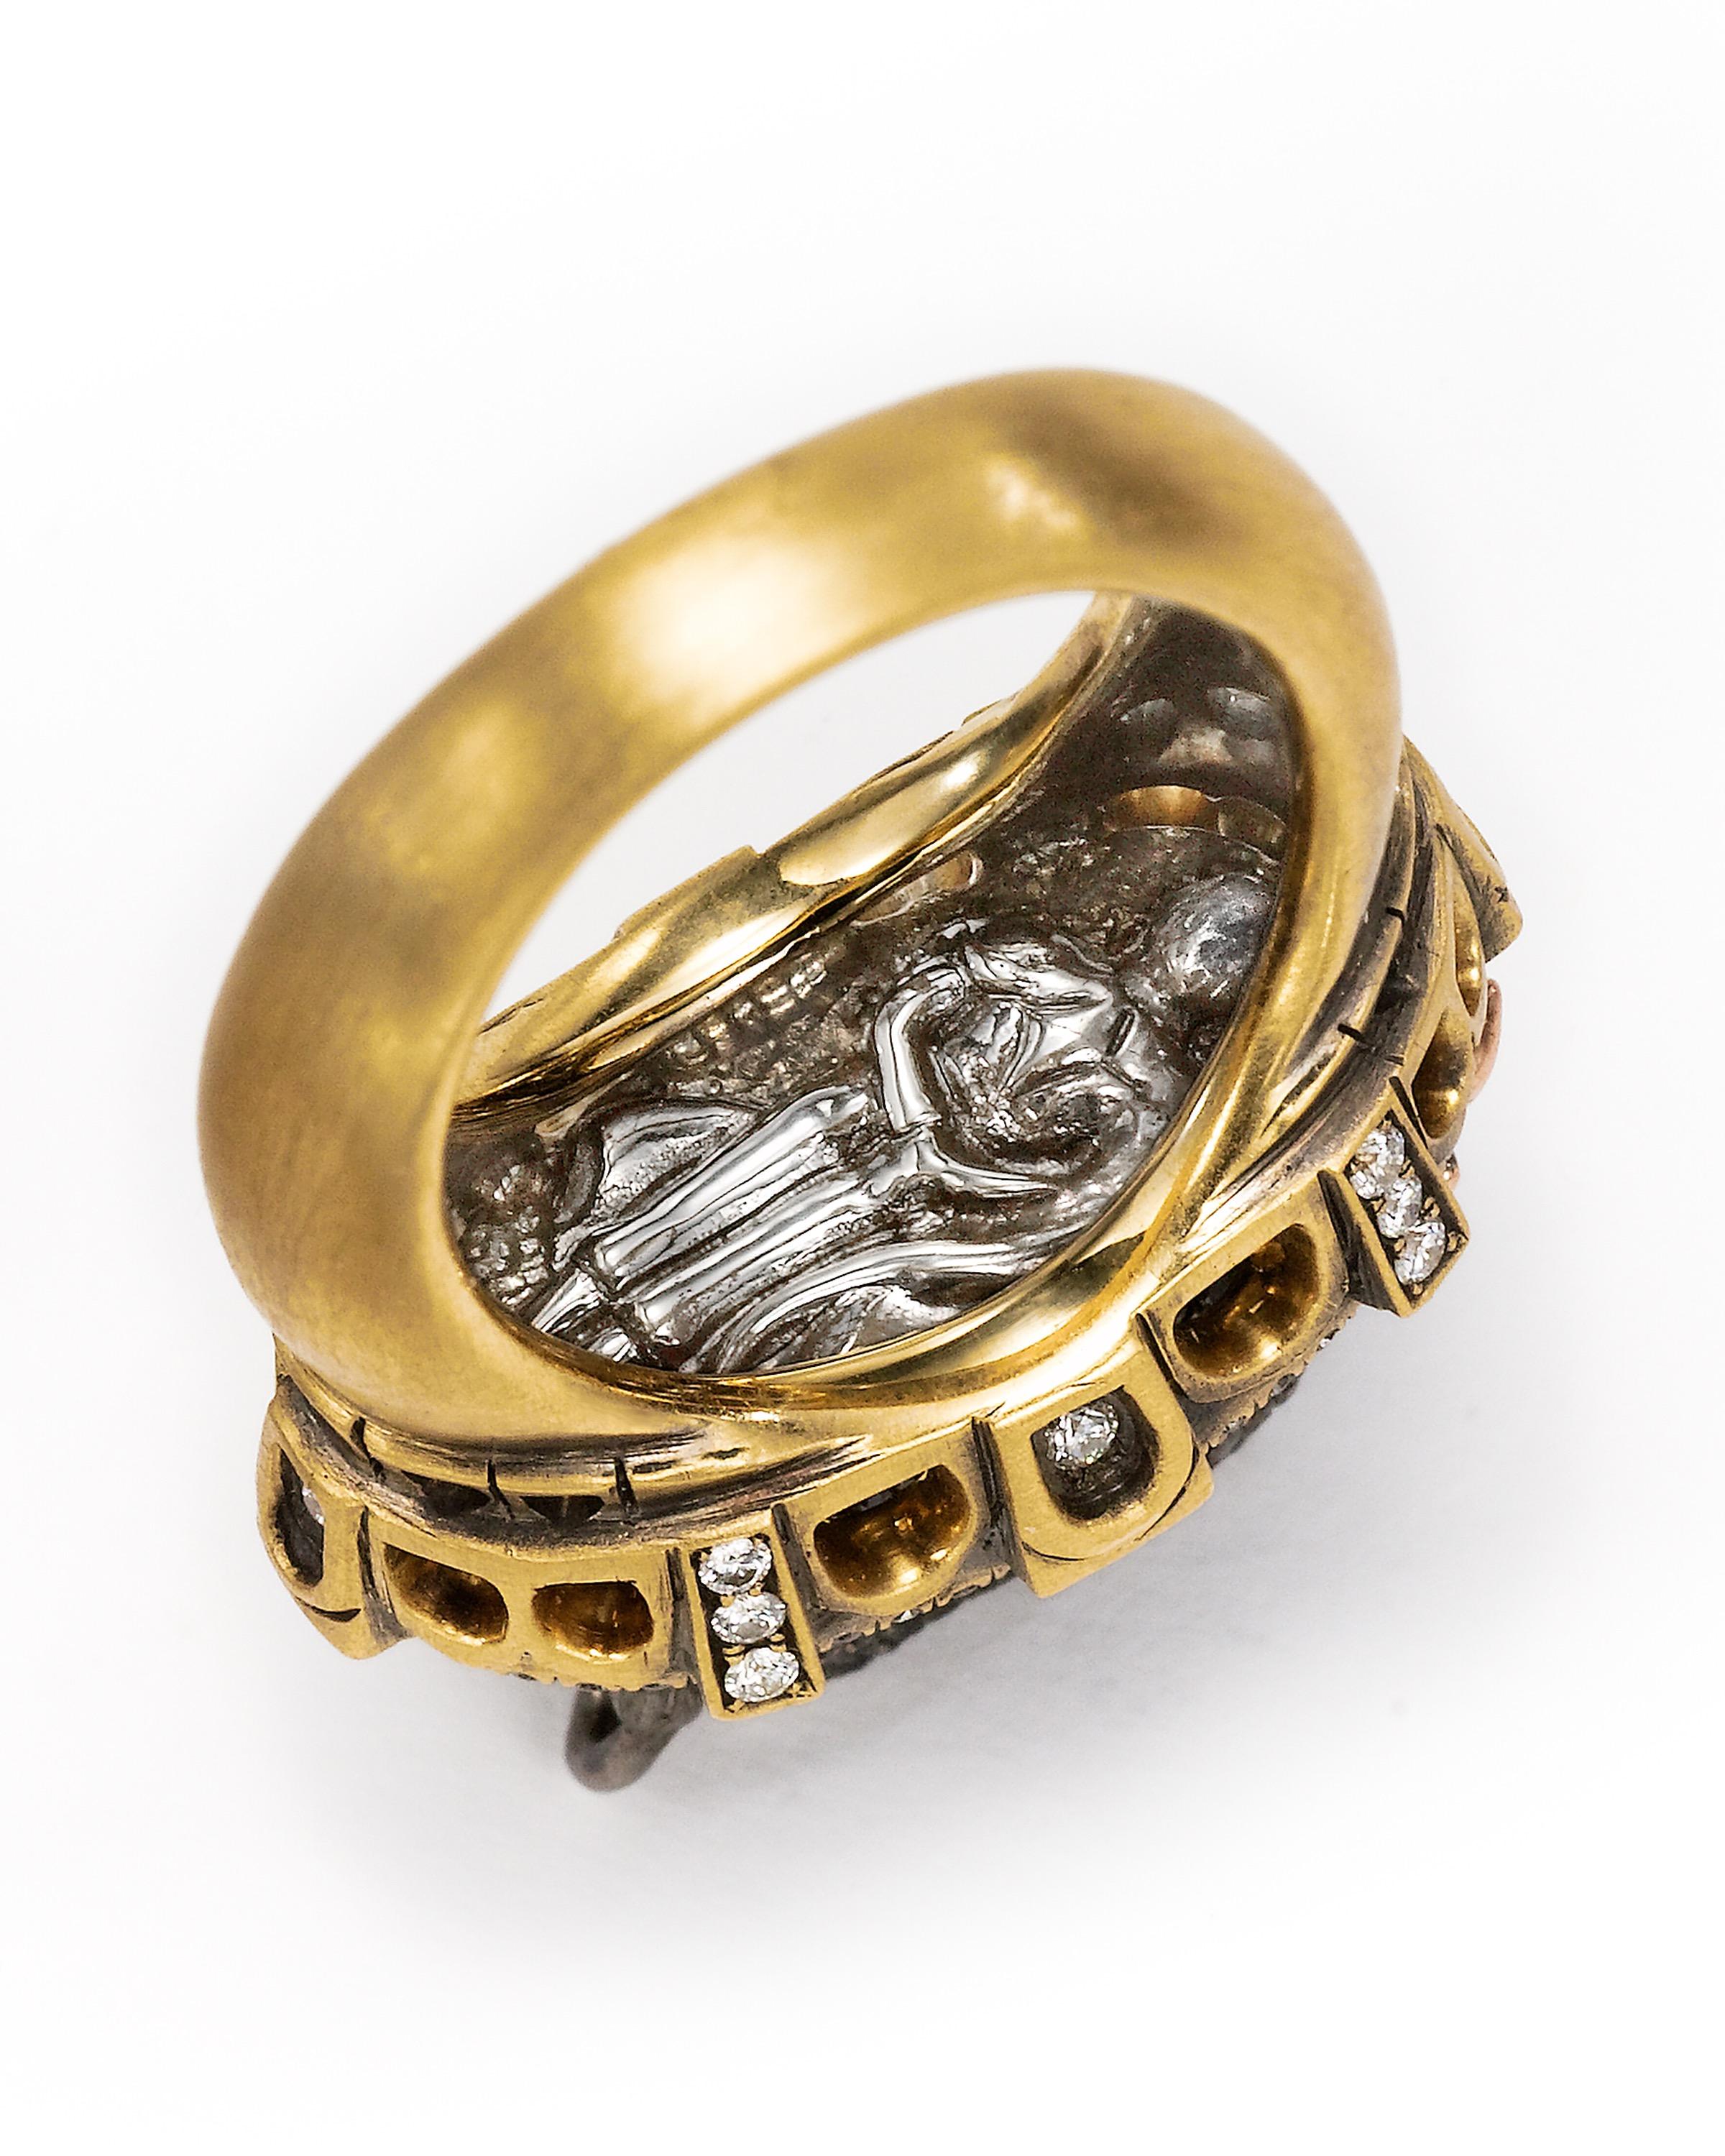 The Bull and Bullfighter Ring is the fourth in Wendy Brandes's seven-ring Maneater series, a collection that upends assumptions about power. Each Maneater ring features a triumphant figure on top, with a tiny man tucked away inside of the band. In